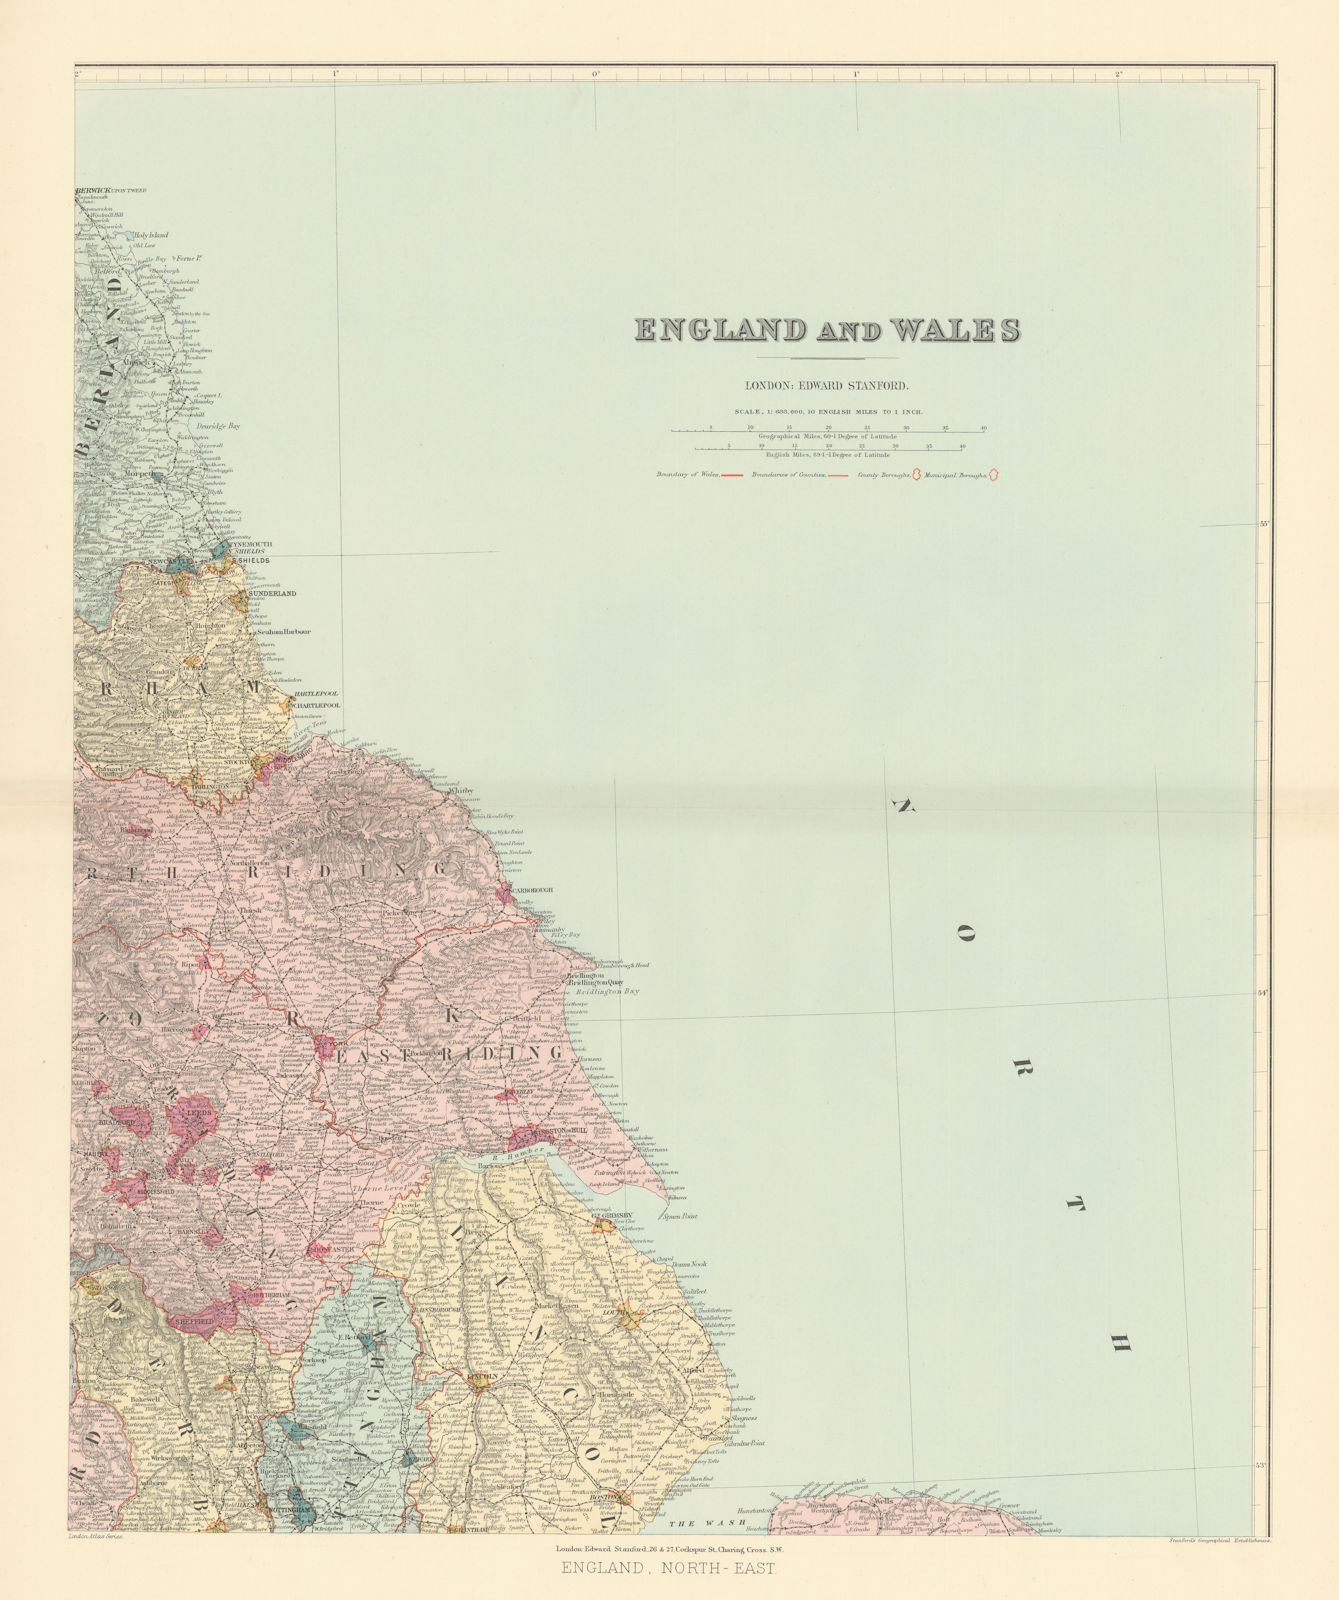 North east England. Tyneside Yorkshire Lincolnshire. 62x51cm STANFORD 1896 map